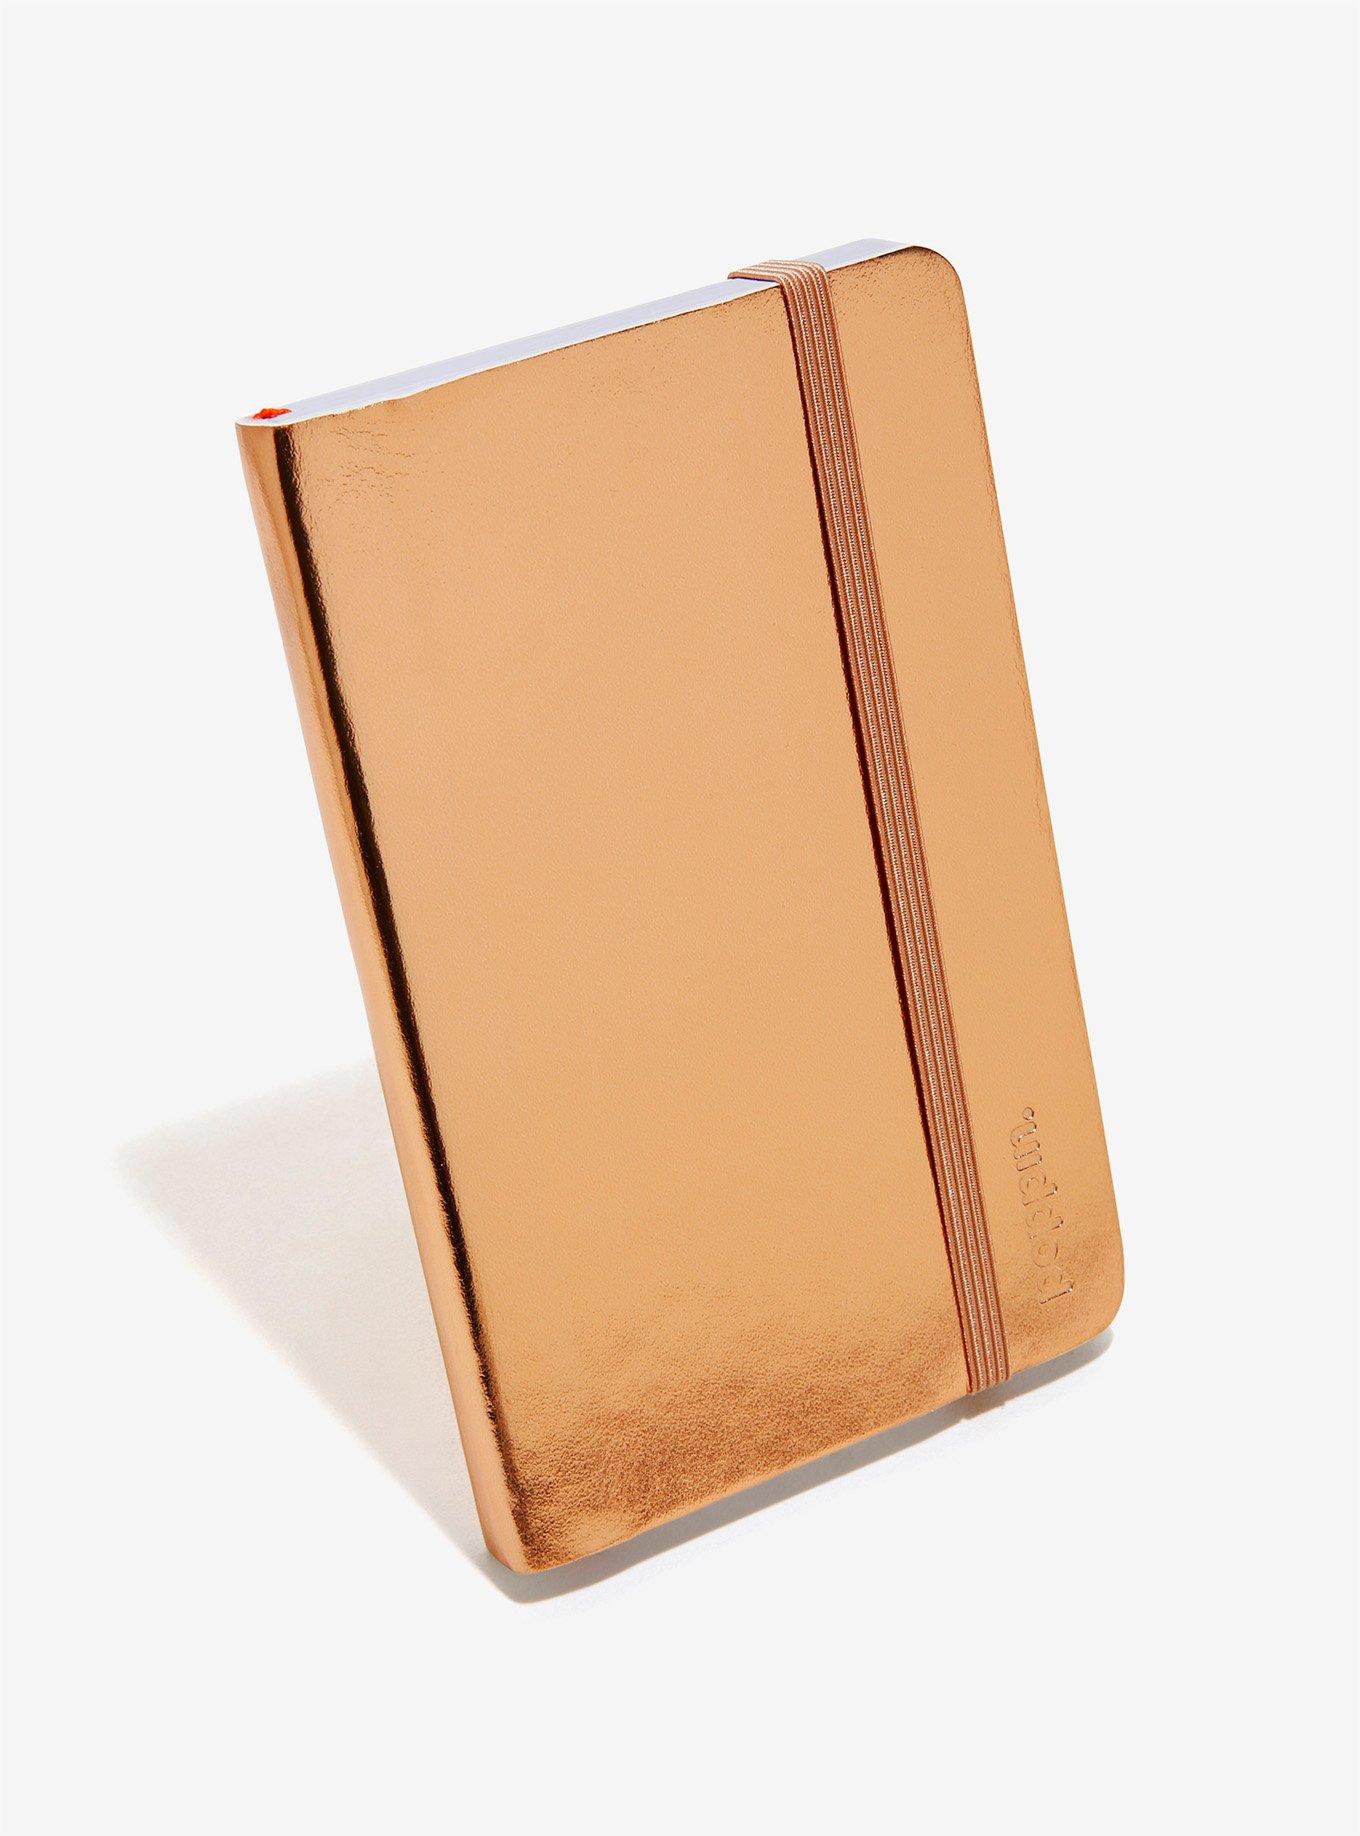 Poppin Small Soft Cover Copper Notebook, , hi-res